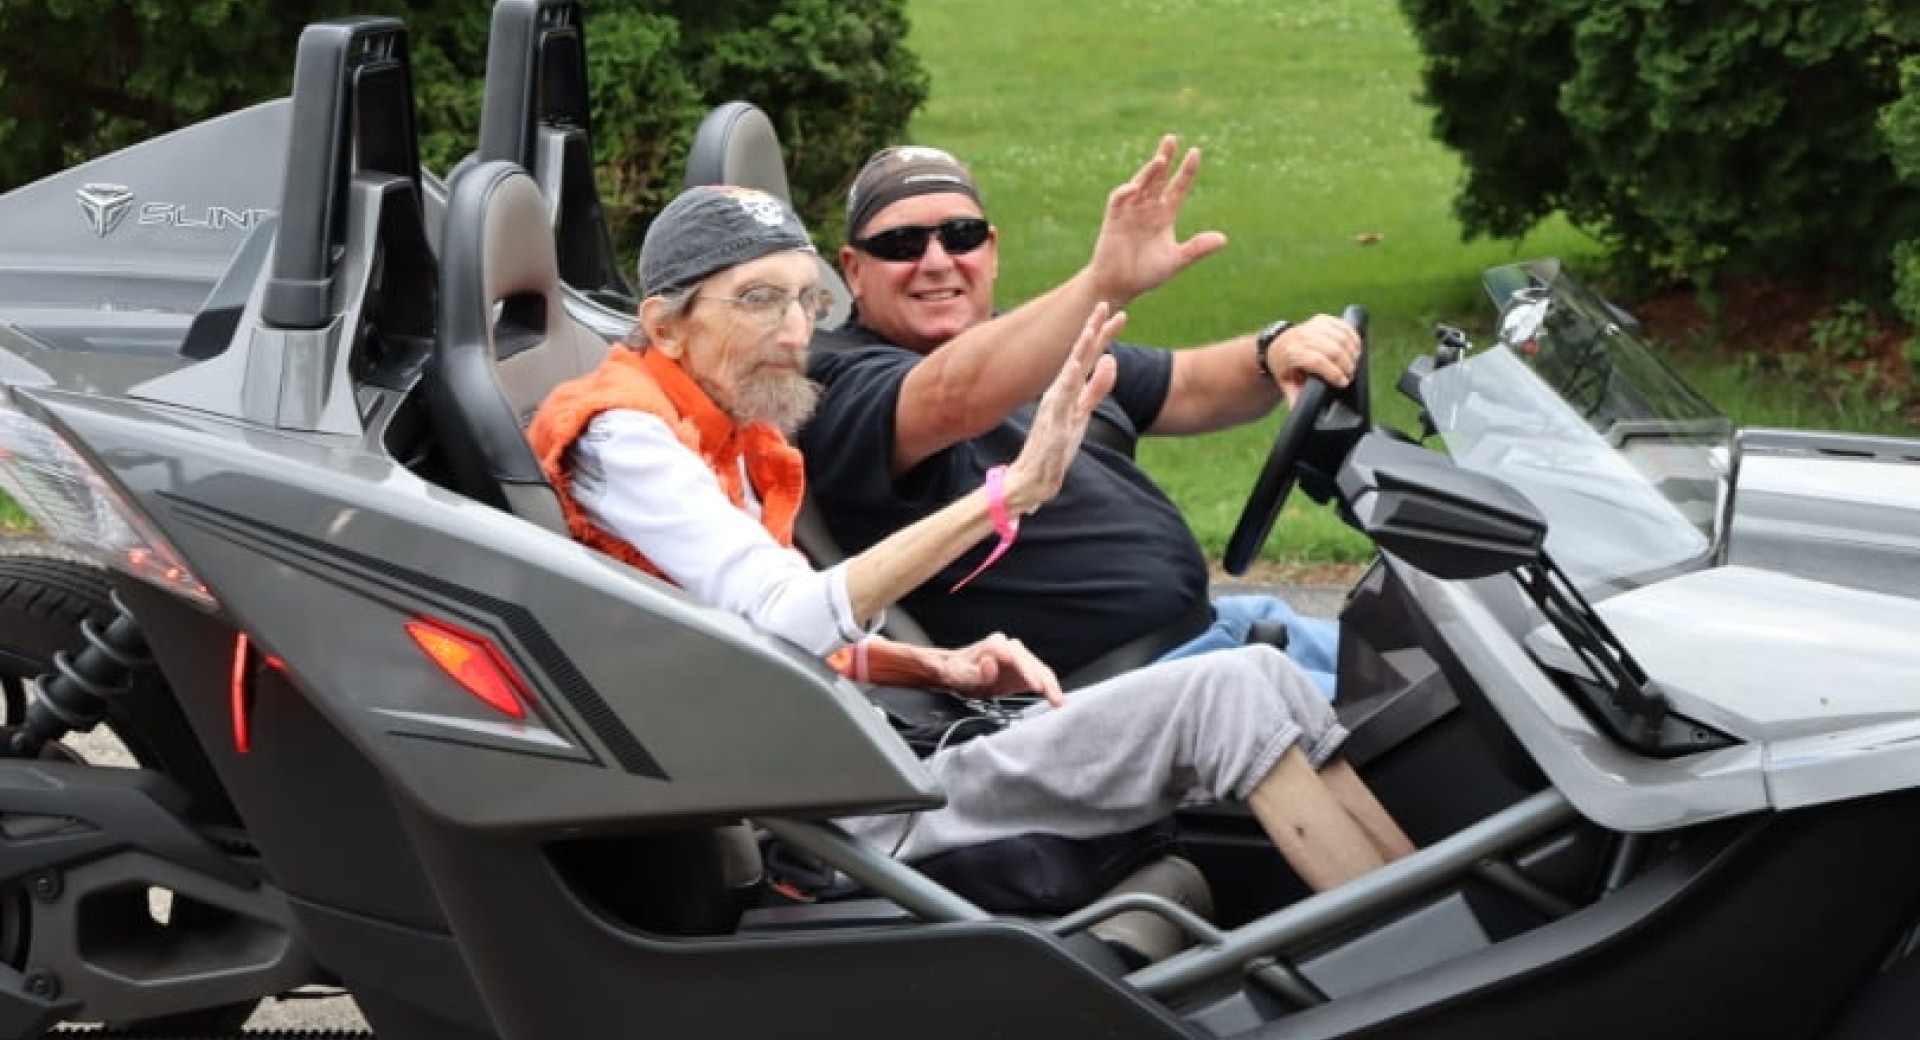 Get Your Motor Running: Rainbow Social Workers Give Patient One Final Motorcycle Ride